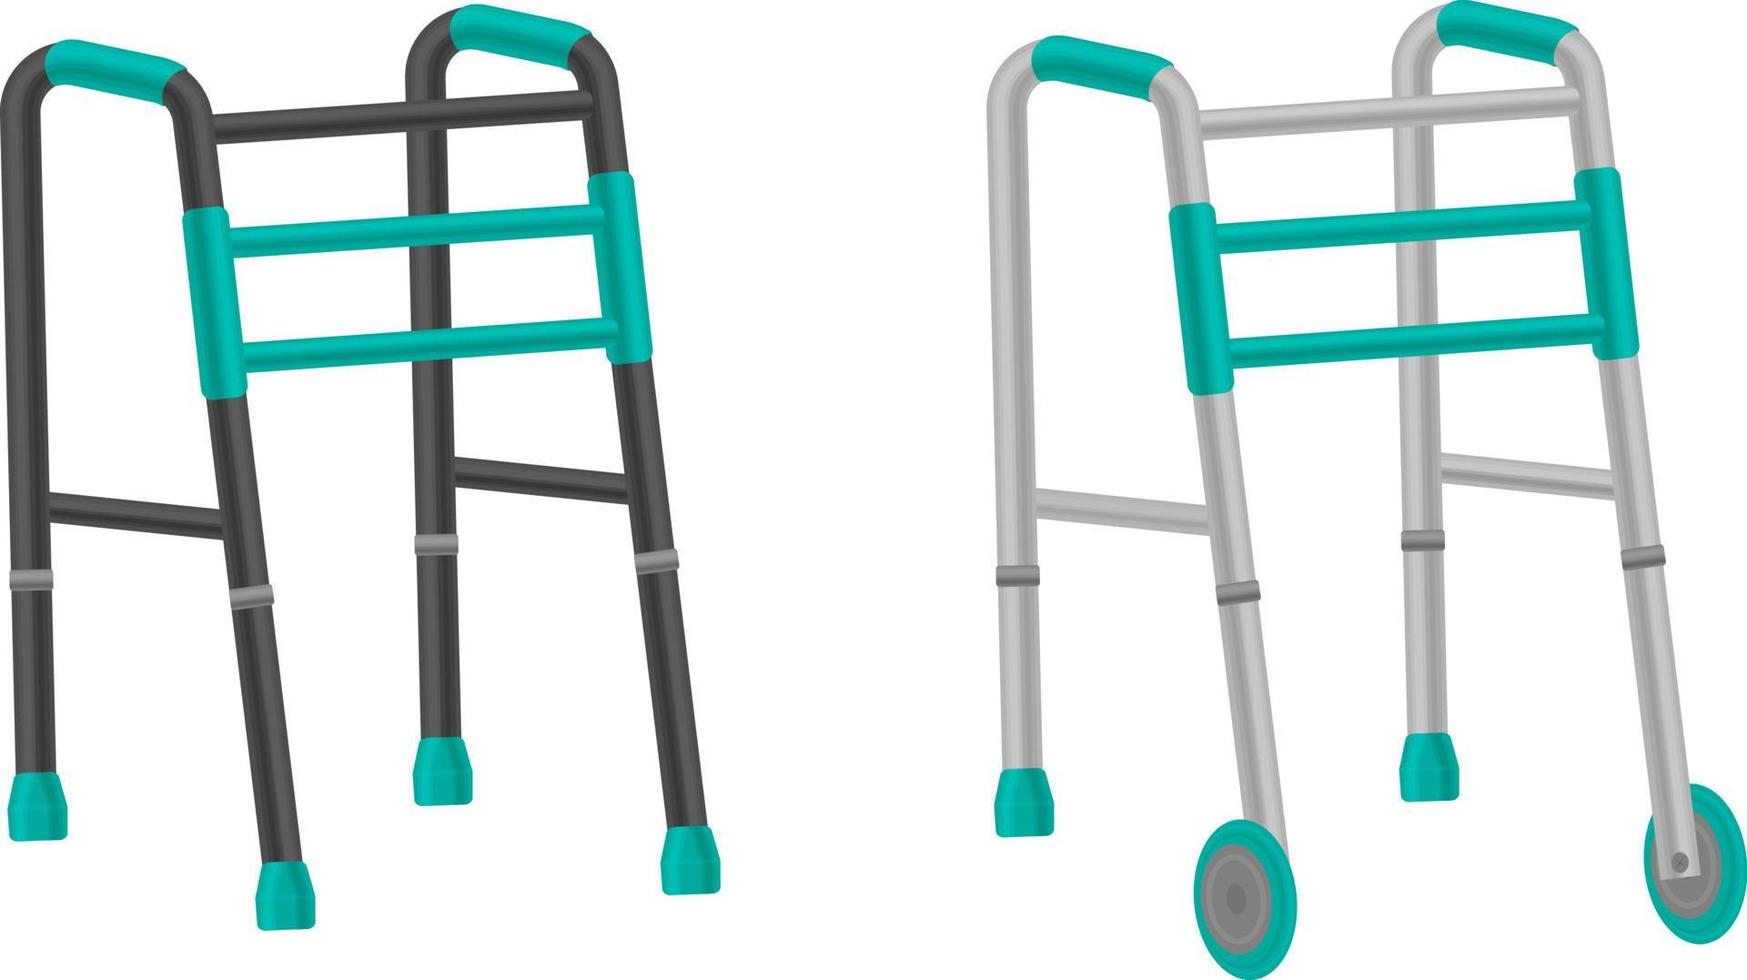 Vector set of walkers for the elderly. A walker for the elderly, which helps people with disabilities to move around. The illustration is isolated on white background